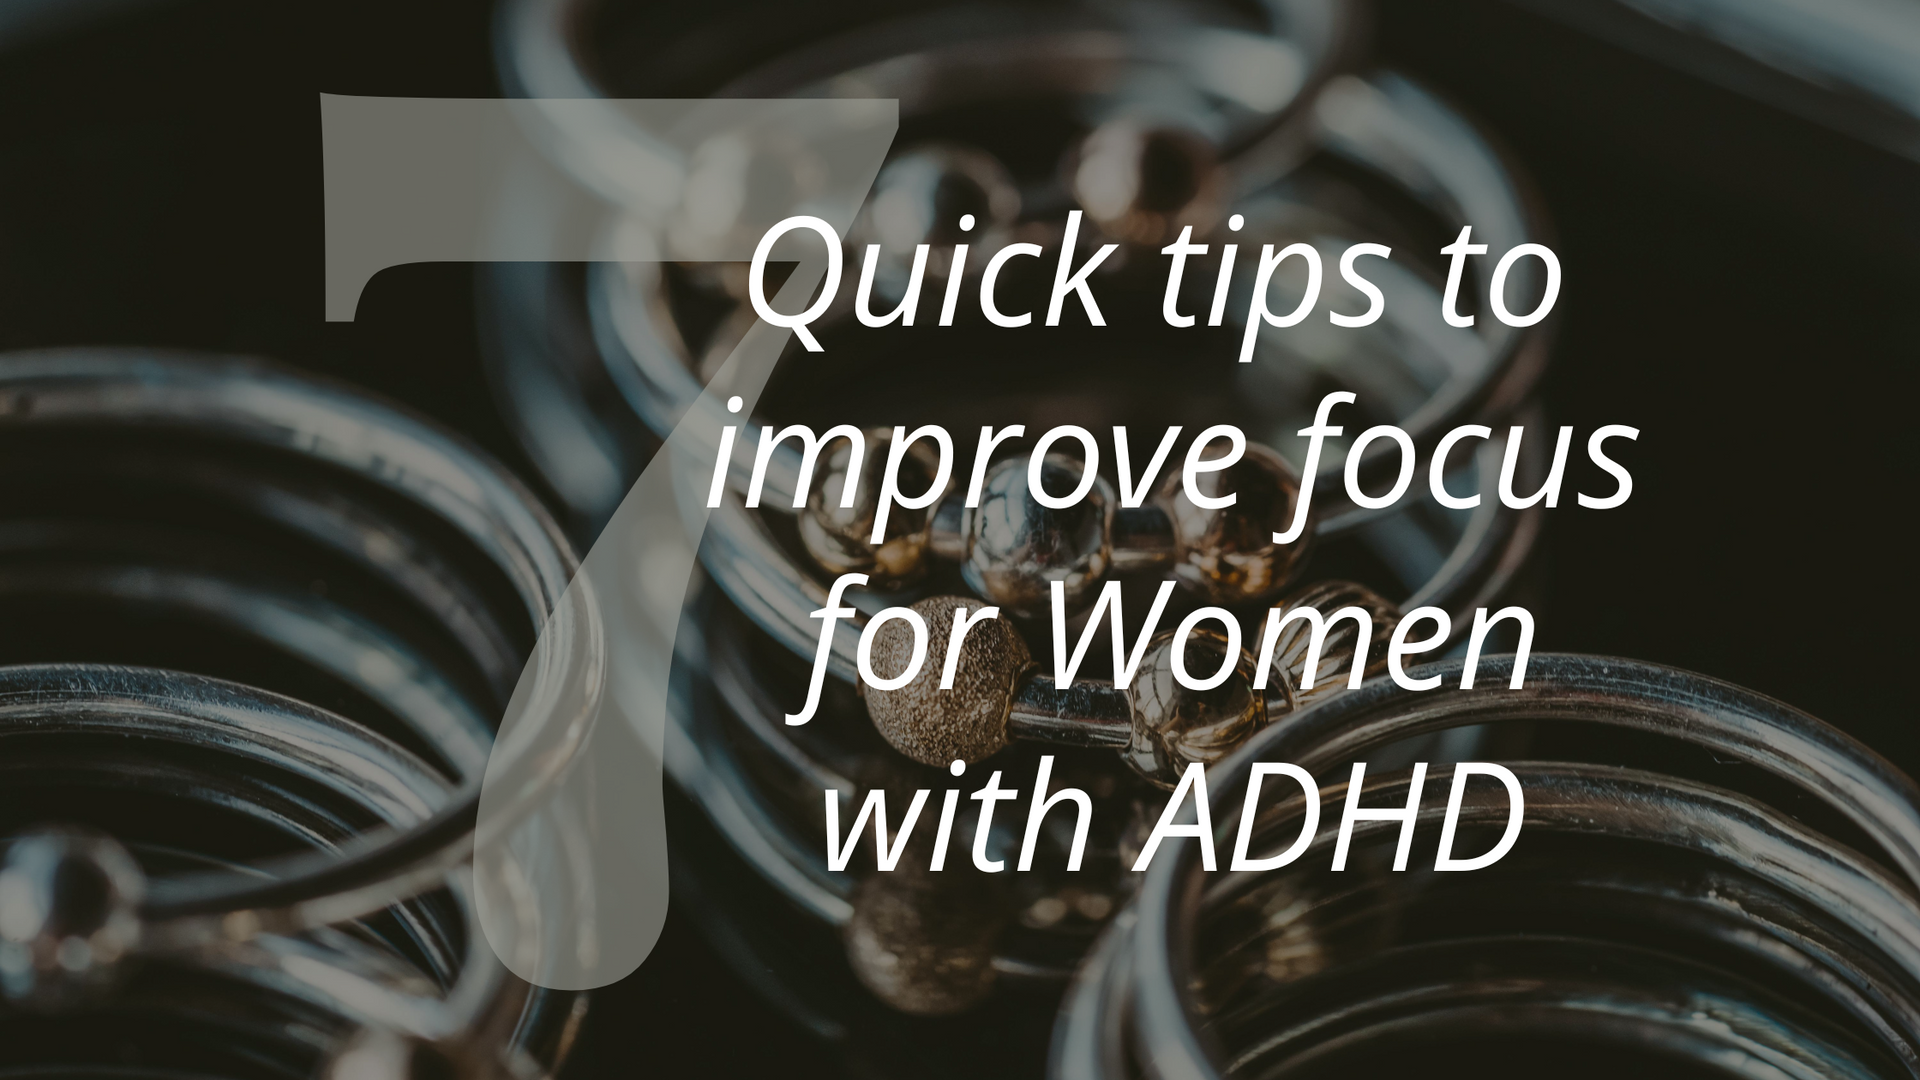 Do you deal with tight IT bands? #audhder #adhshe #adhdinwomenlooksdif, it  band